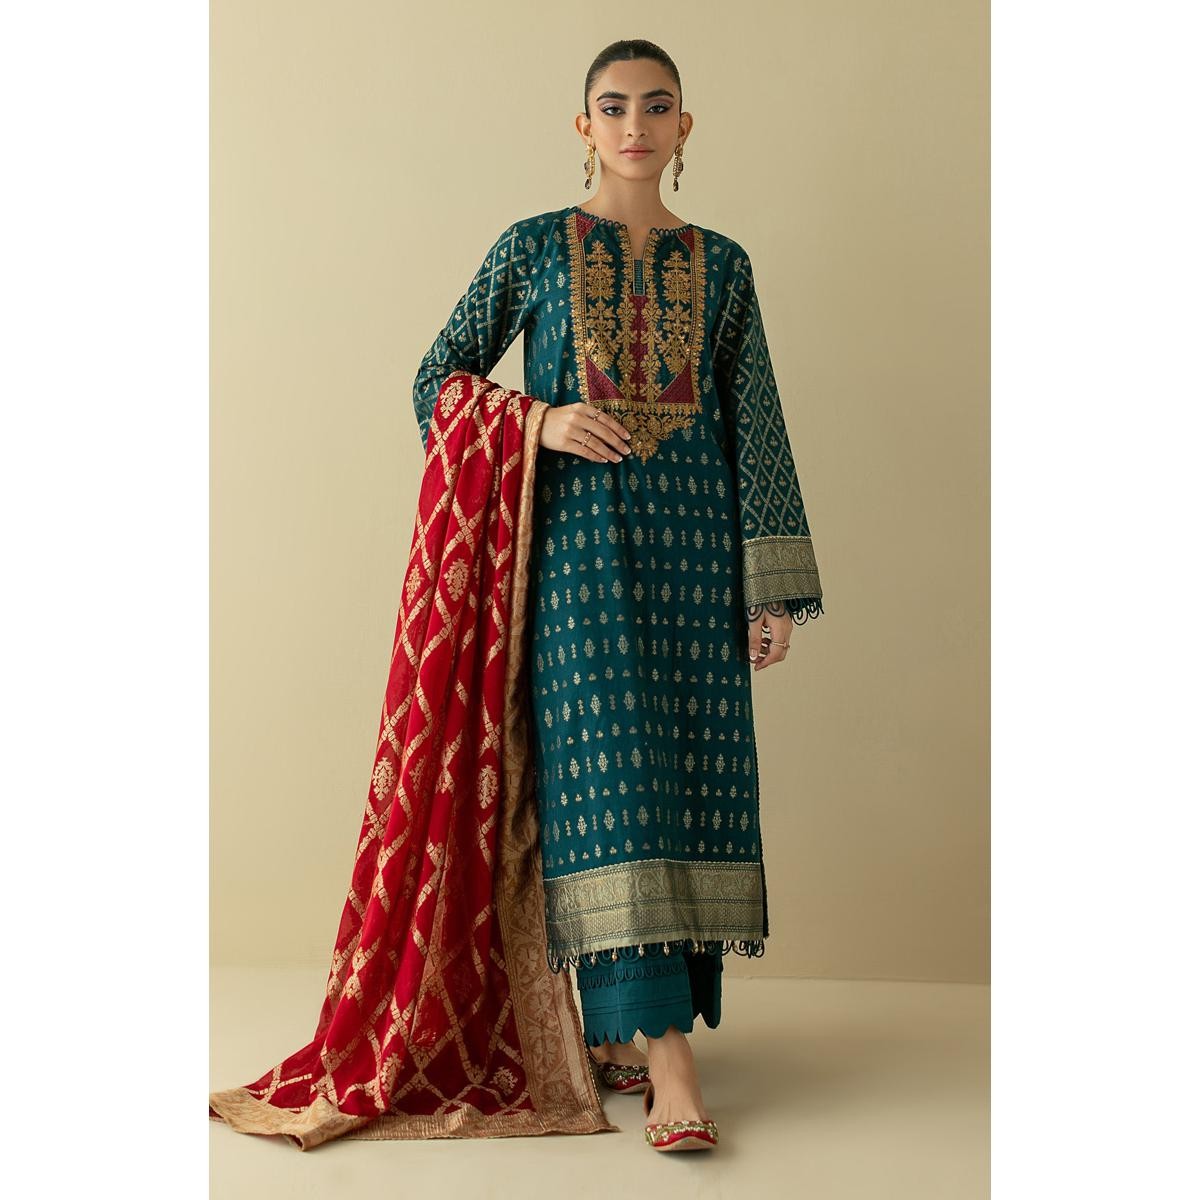 /2023/01/orient-unstitched-3-piece-embroidered-jacquard-shirt-cambric-pant-and-jacquard-dupatta-376760278_pk-1862851748-image1.jpeg